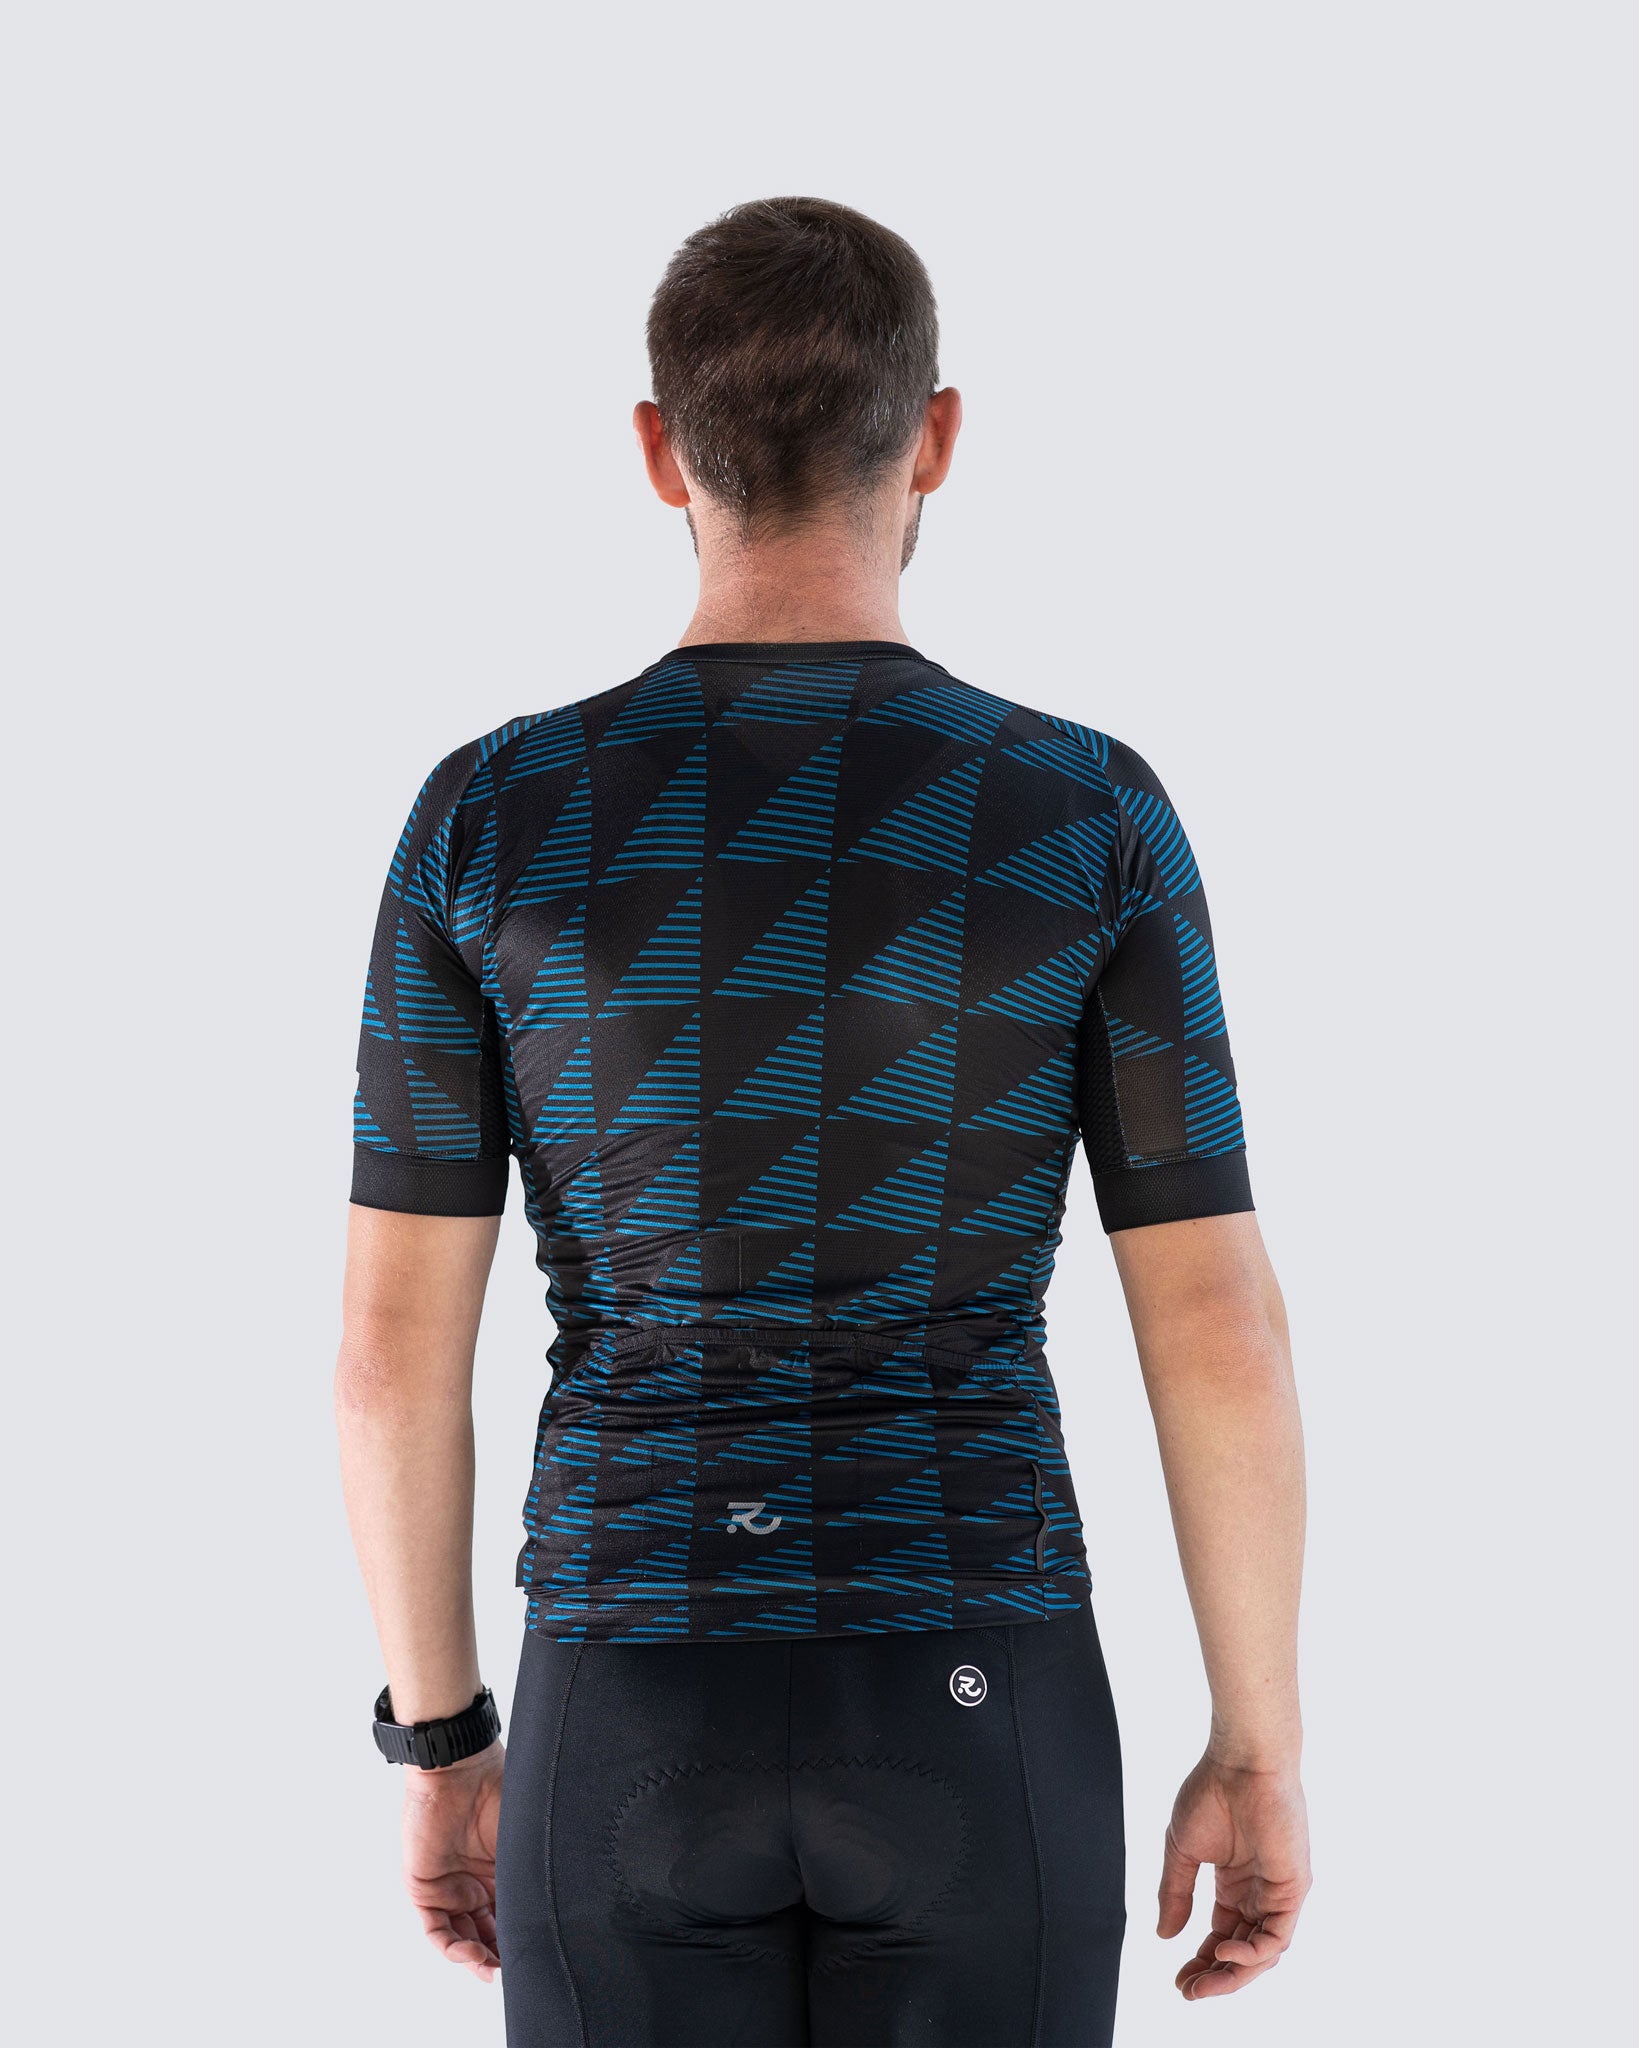 back view of dark blue men cycling jersey